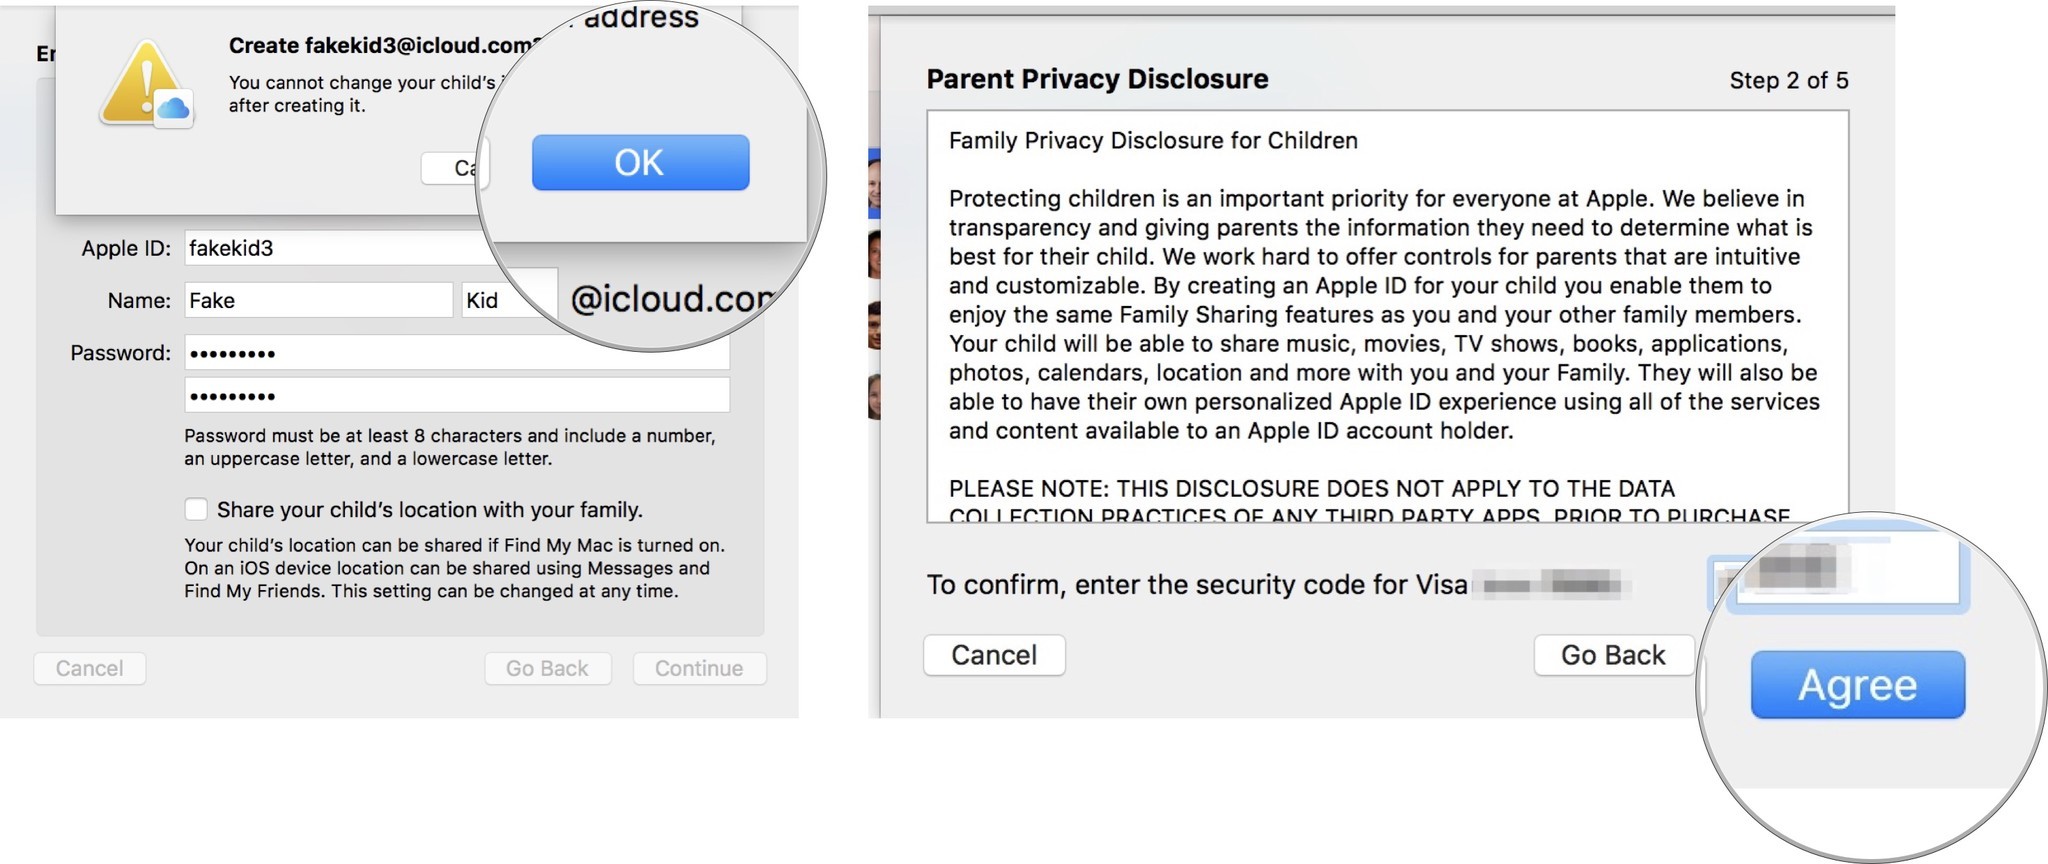 Add a child account: Click OK, then enter your CVV, then click Agree